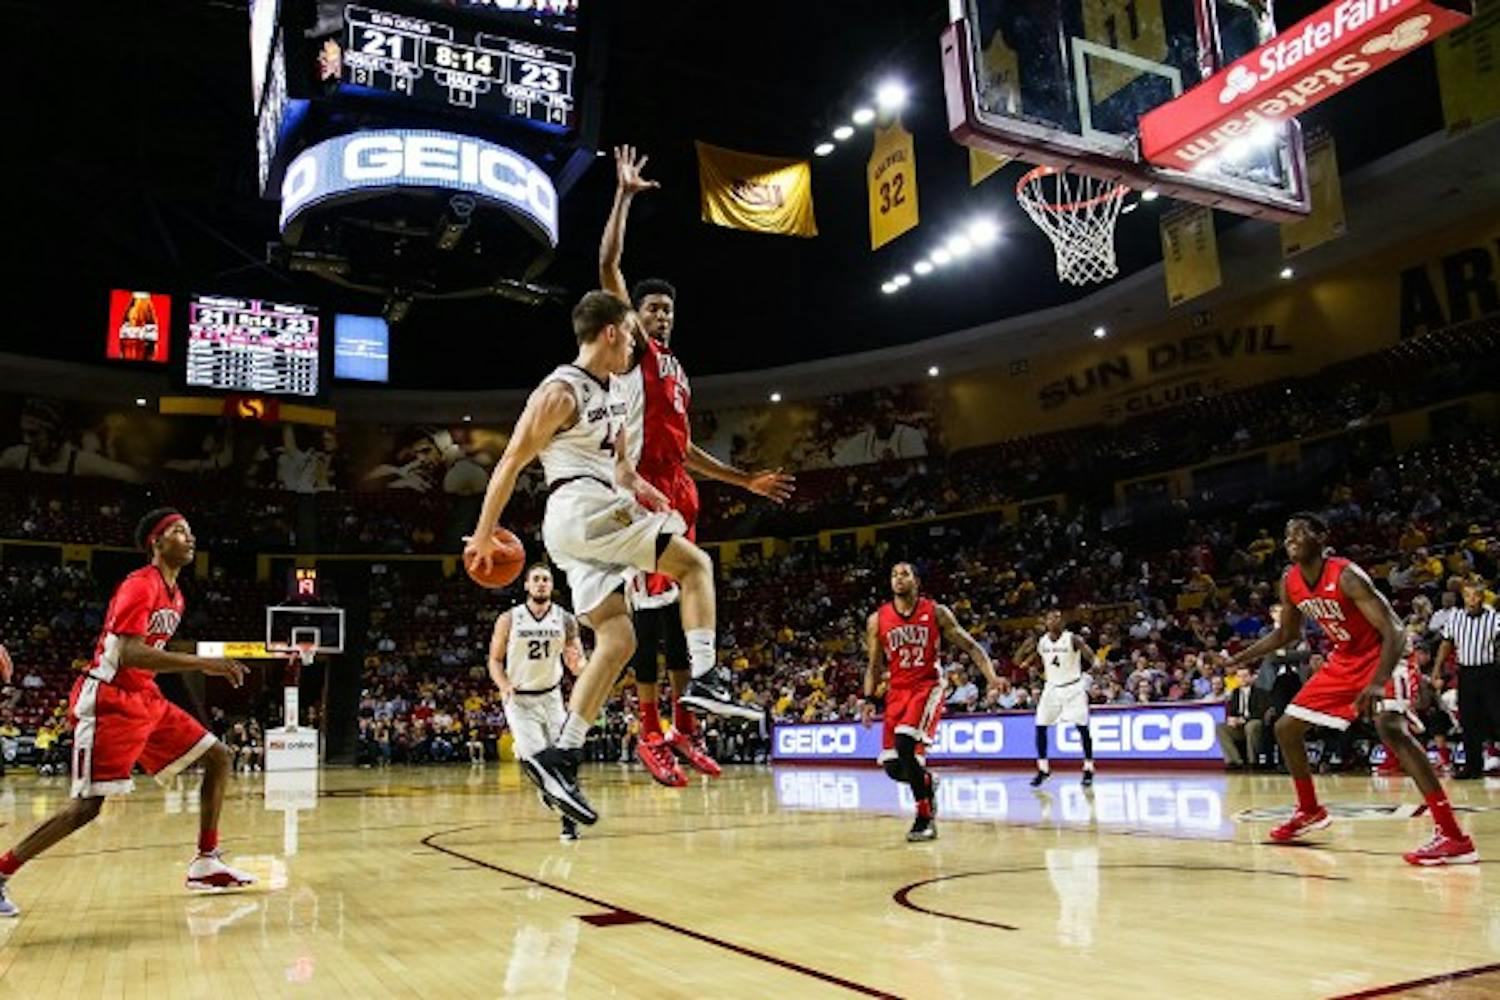 Freshman guard Kodi Justice throws a behind the back pass at the ASU vs UNLV game on Dec. 3rd, 2014 at the Wells Fargo Arena. Justice would control the game in the second half leading the Sun Devils to a 77-55 victory over the Runnin Rebels. (Photo by Daniel Kwon)